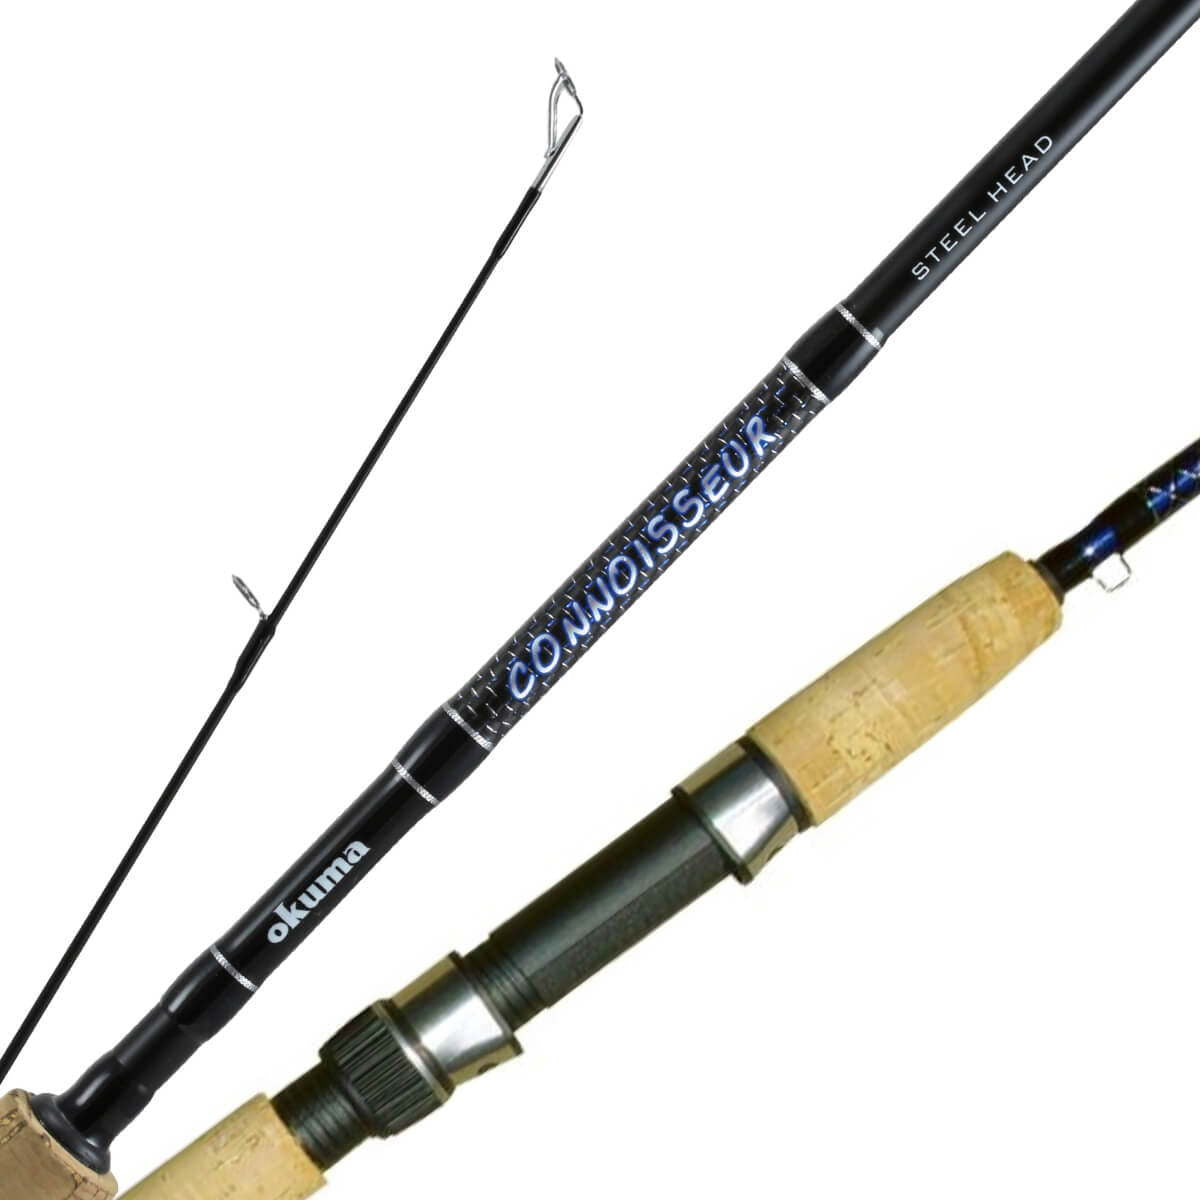 Photo of Okuma Connoisseur "A" Series Steelhead Spinning Rod for sale at United Tackle Shops.